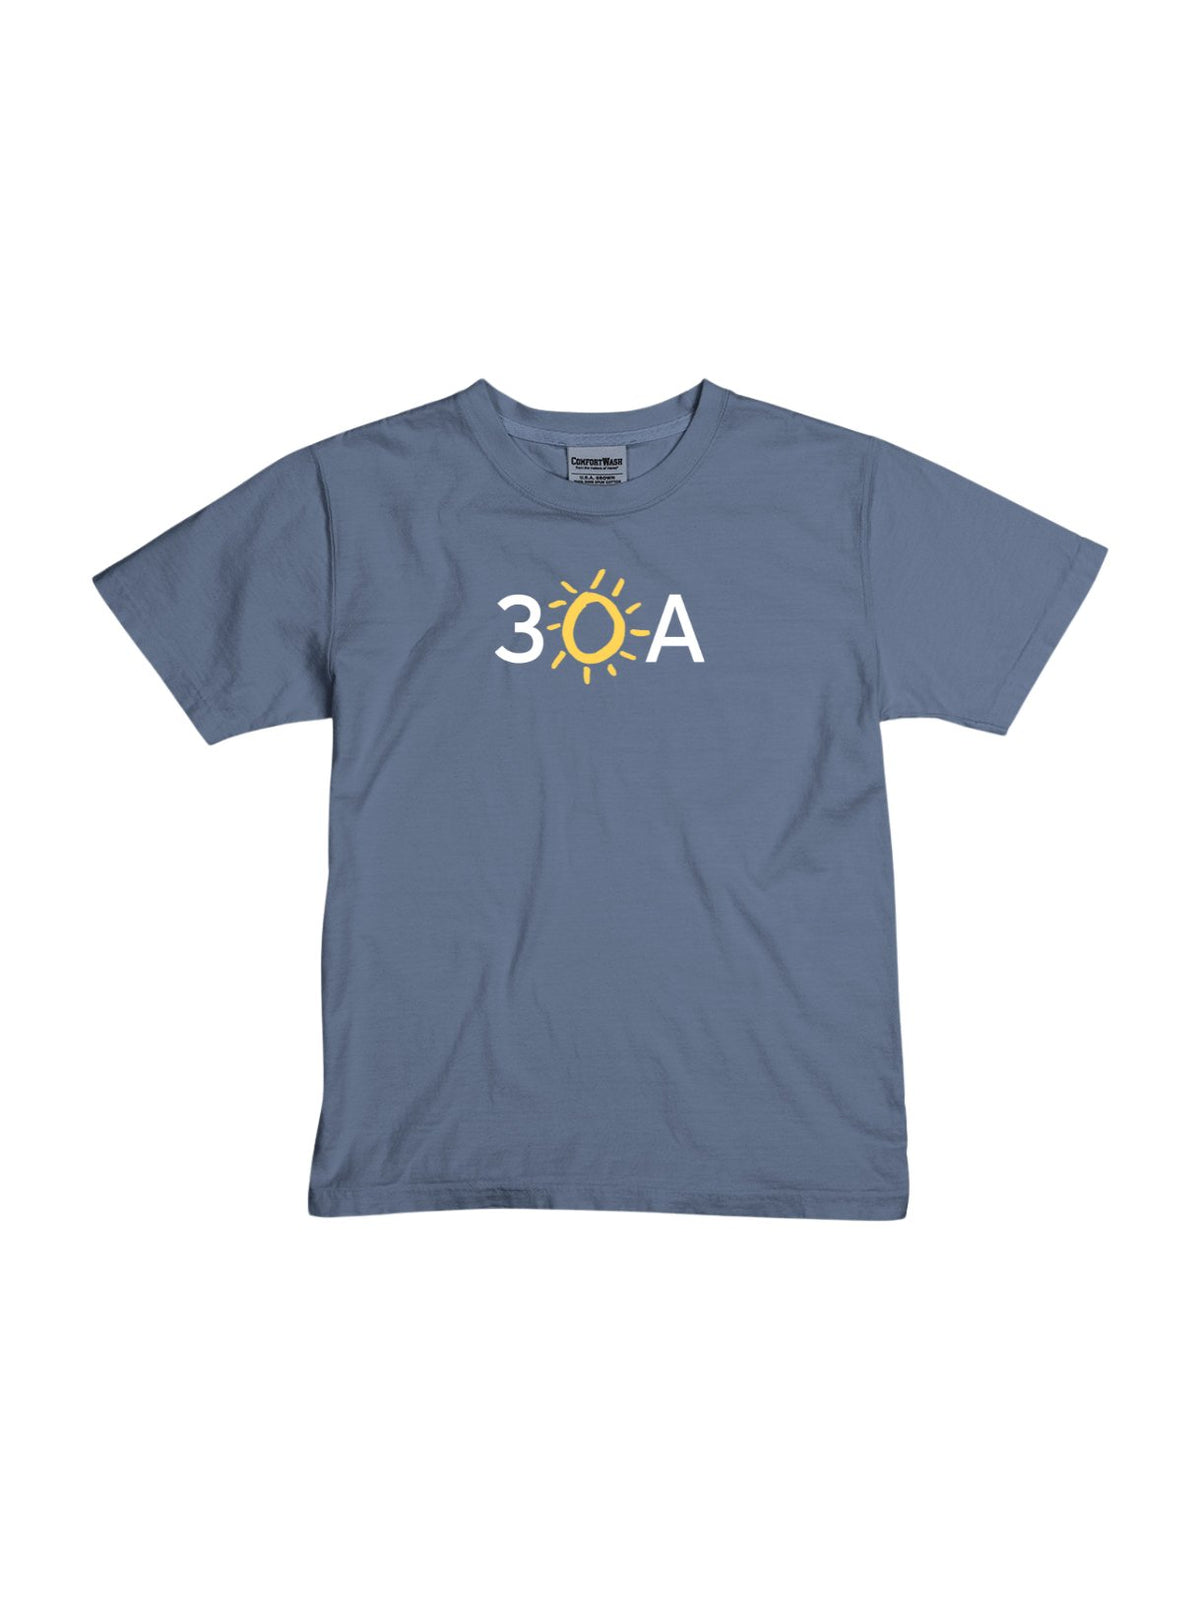 30A Logo Comfort Wash Youth T - shirt - 30A Gear - youth tee